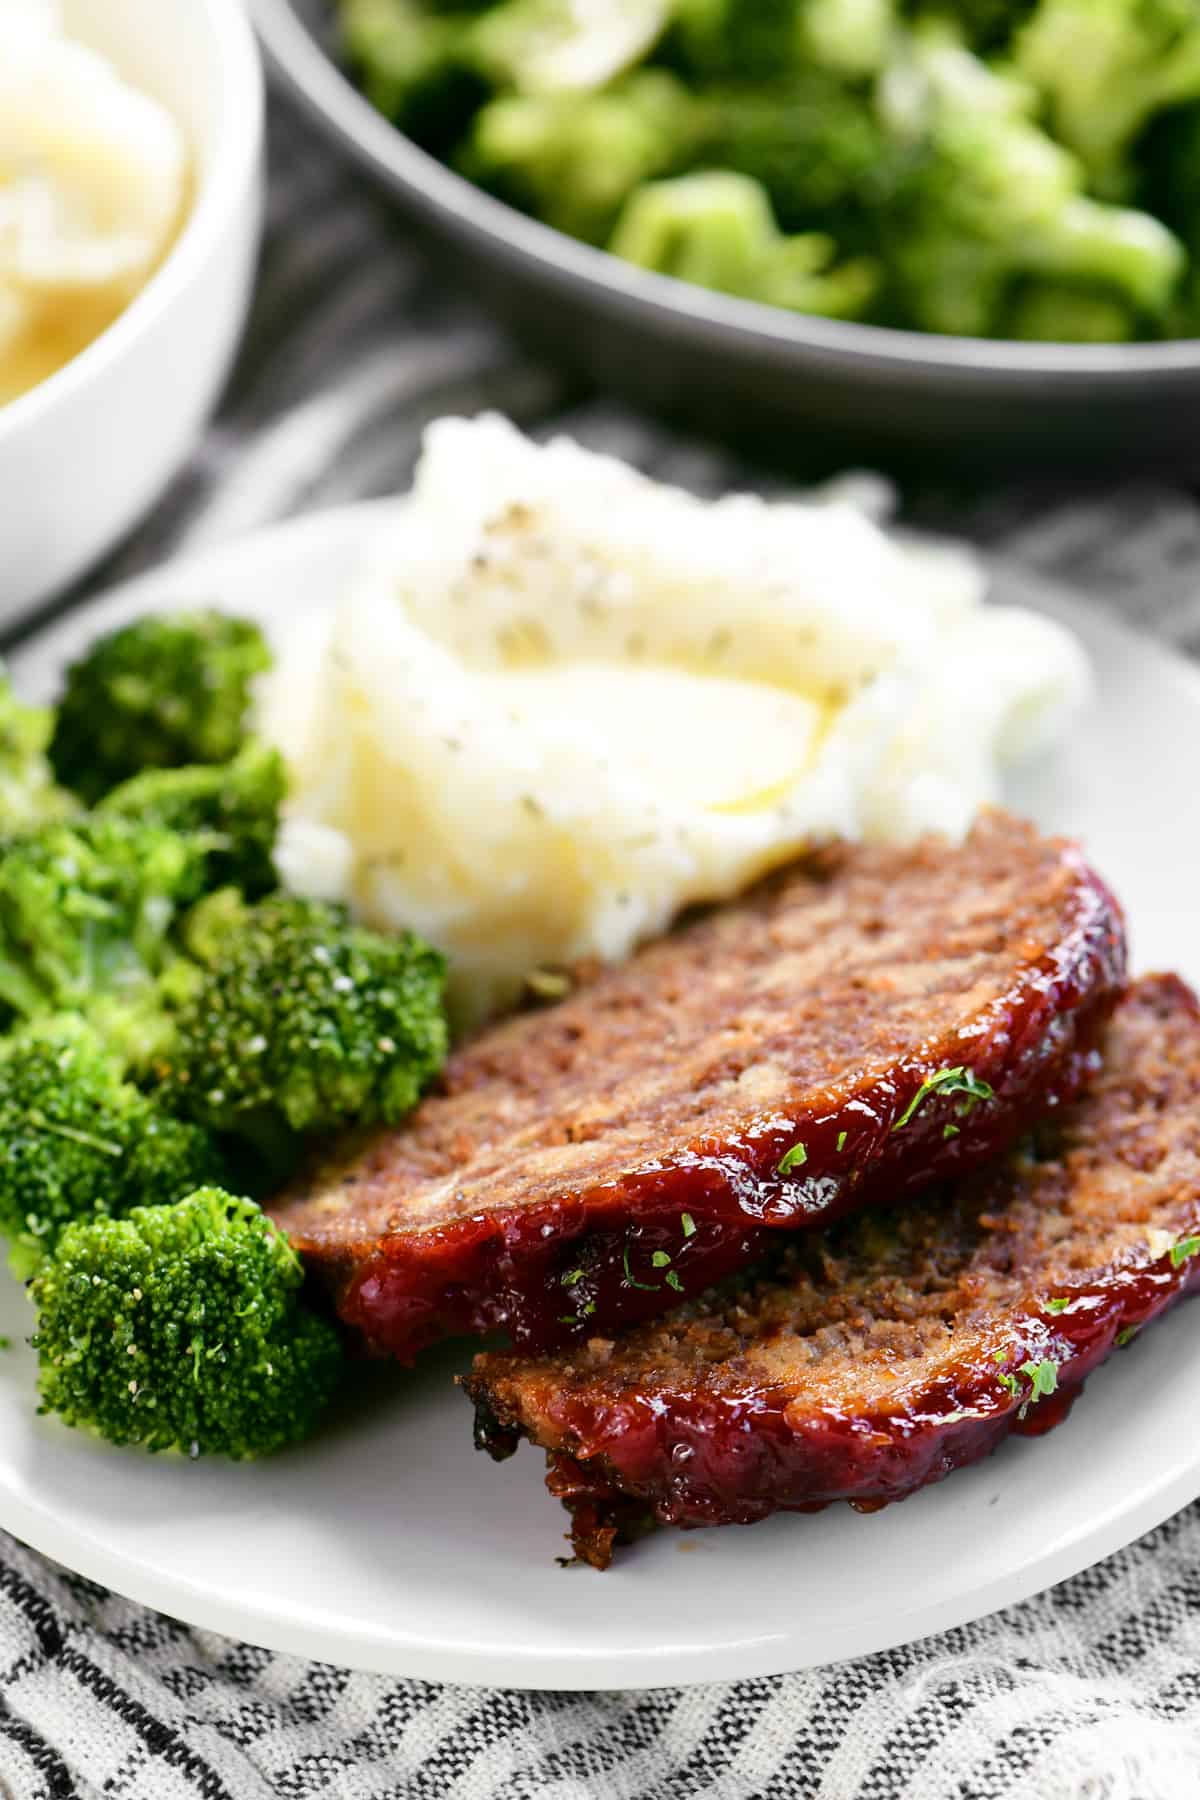 sliced meatloaf on a plate with broccoli and potatoes